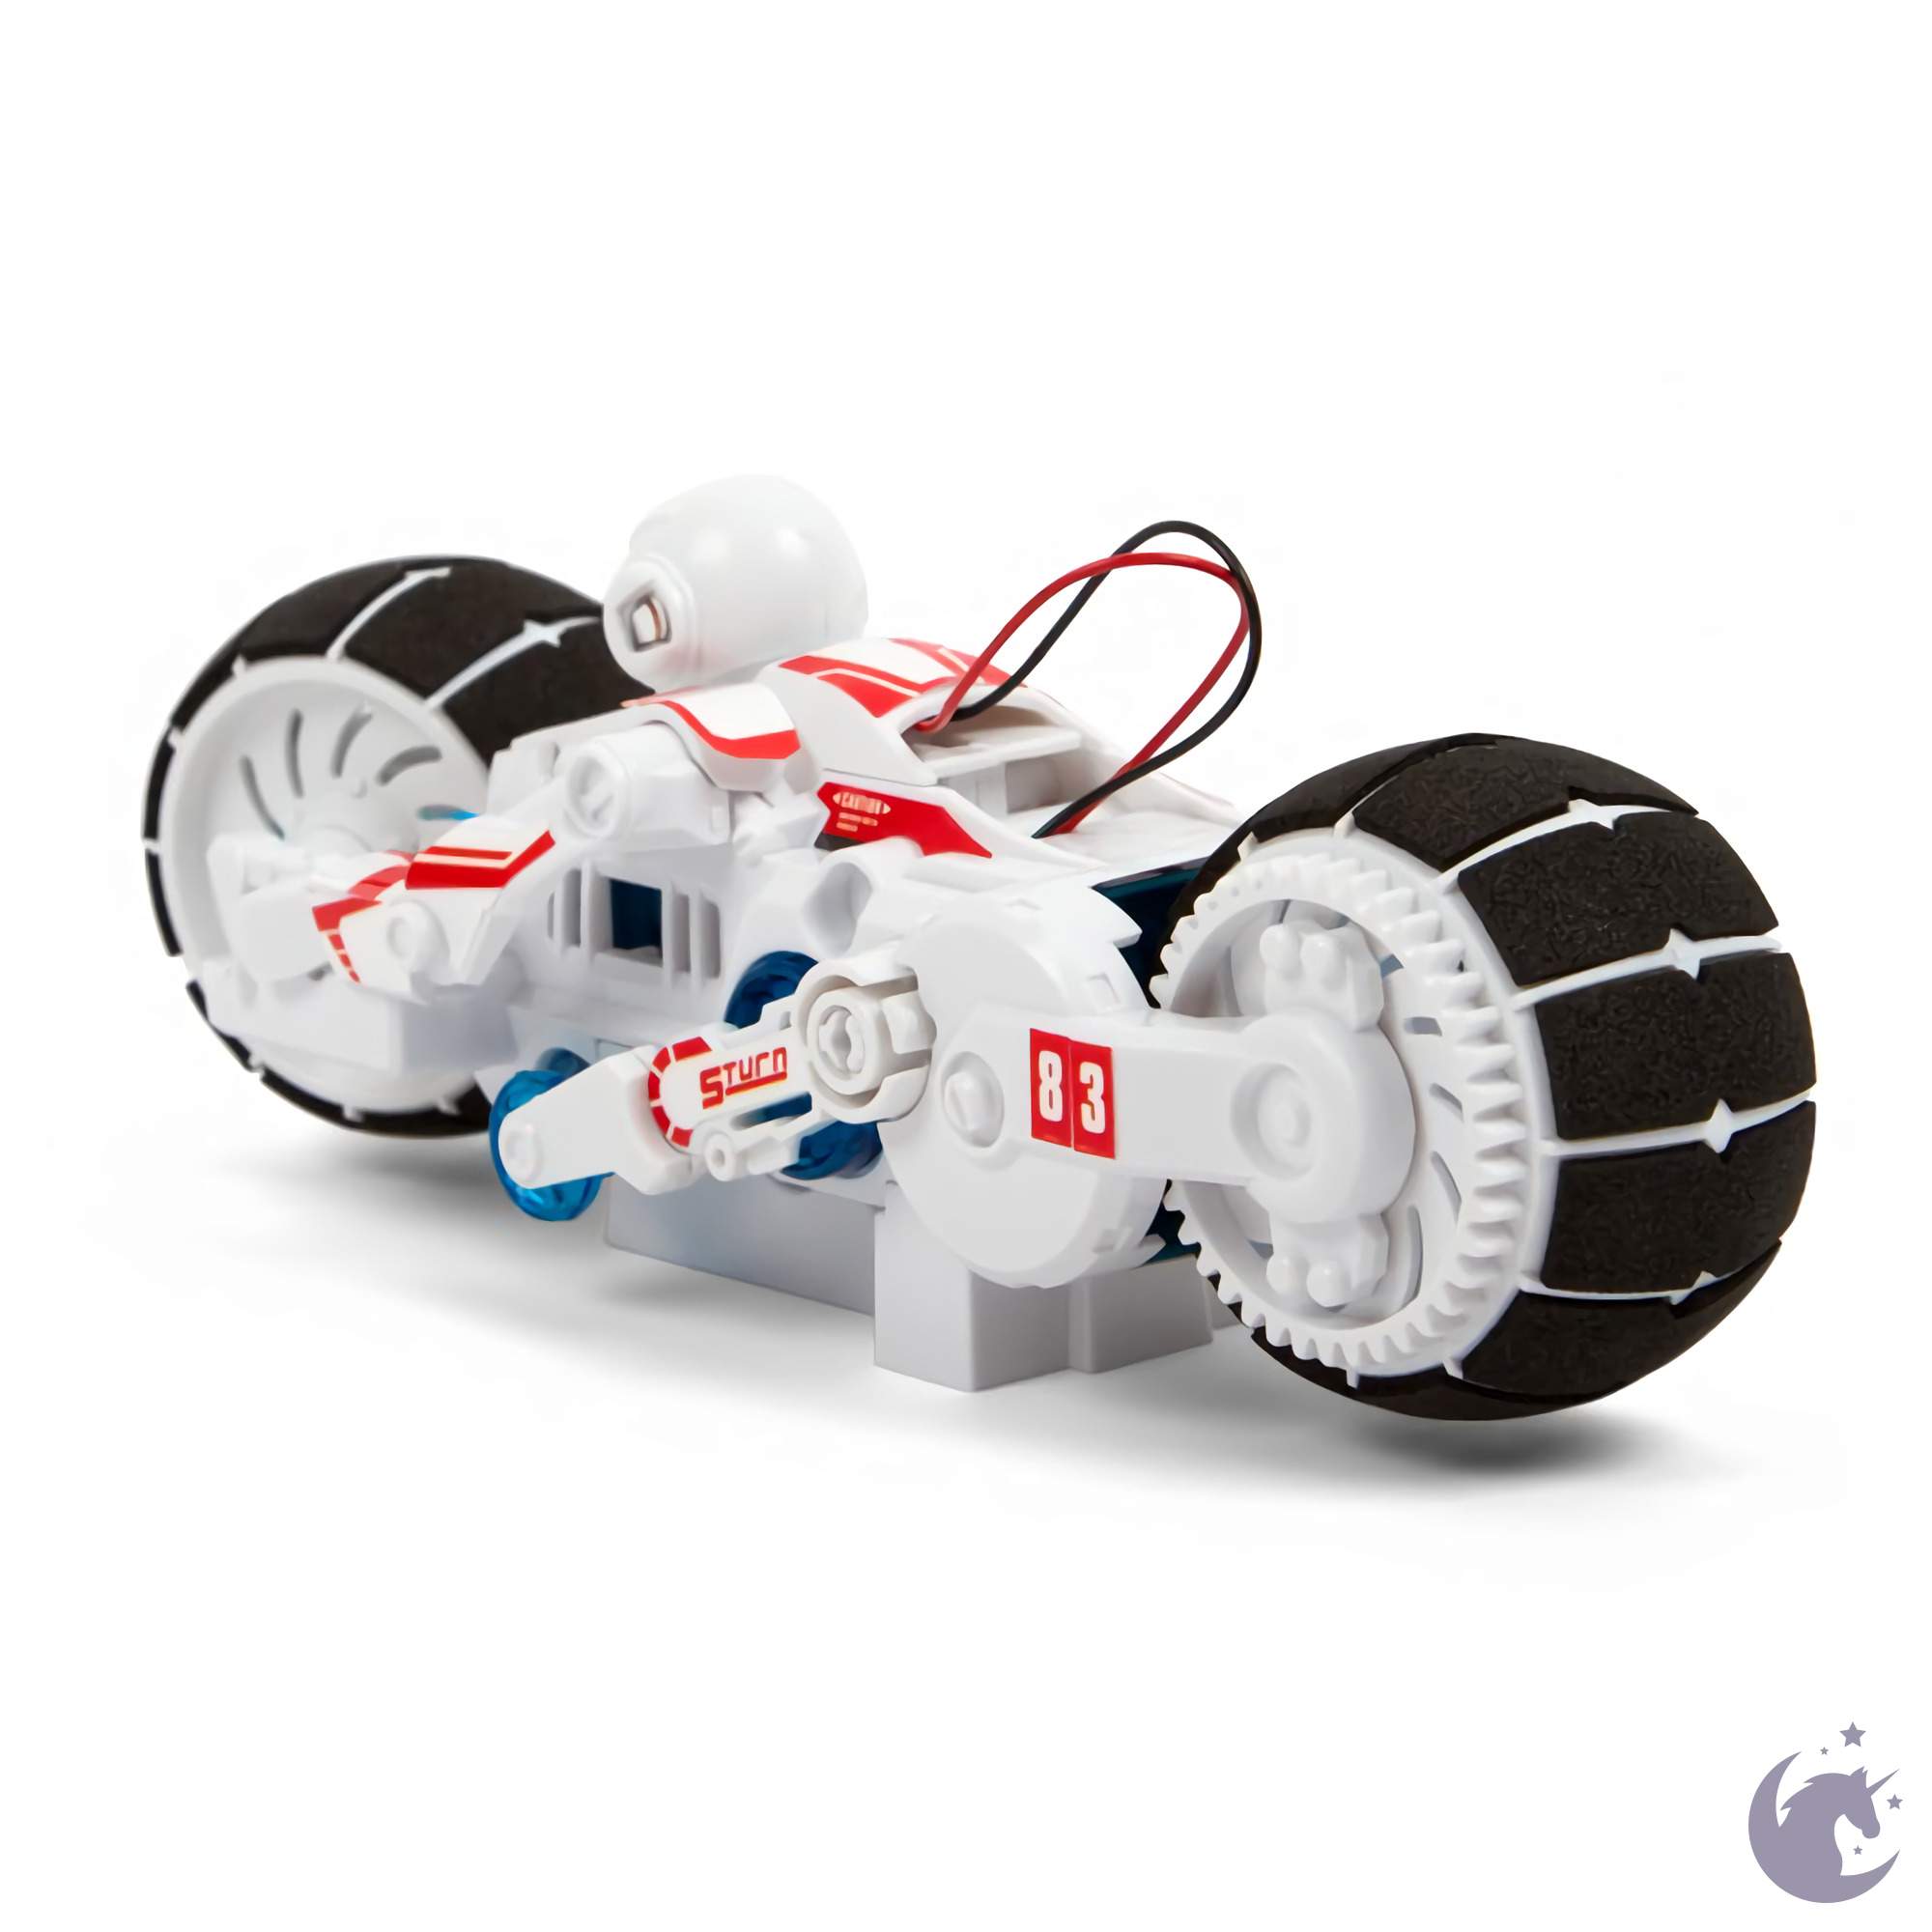 unicorntoys cic kits salt water fuel cell engine motorcycle educational robot kit engineering stem toys for kids CIC21-753